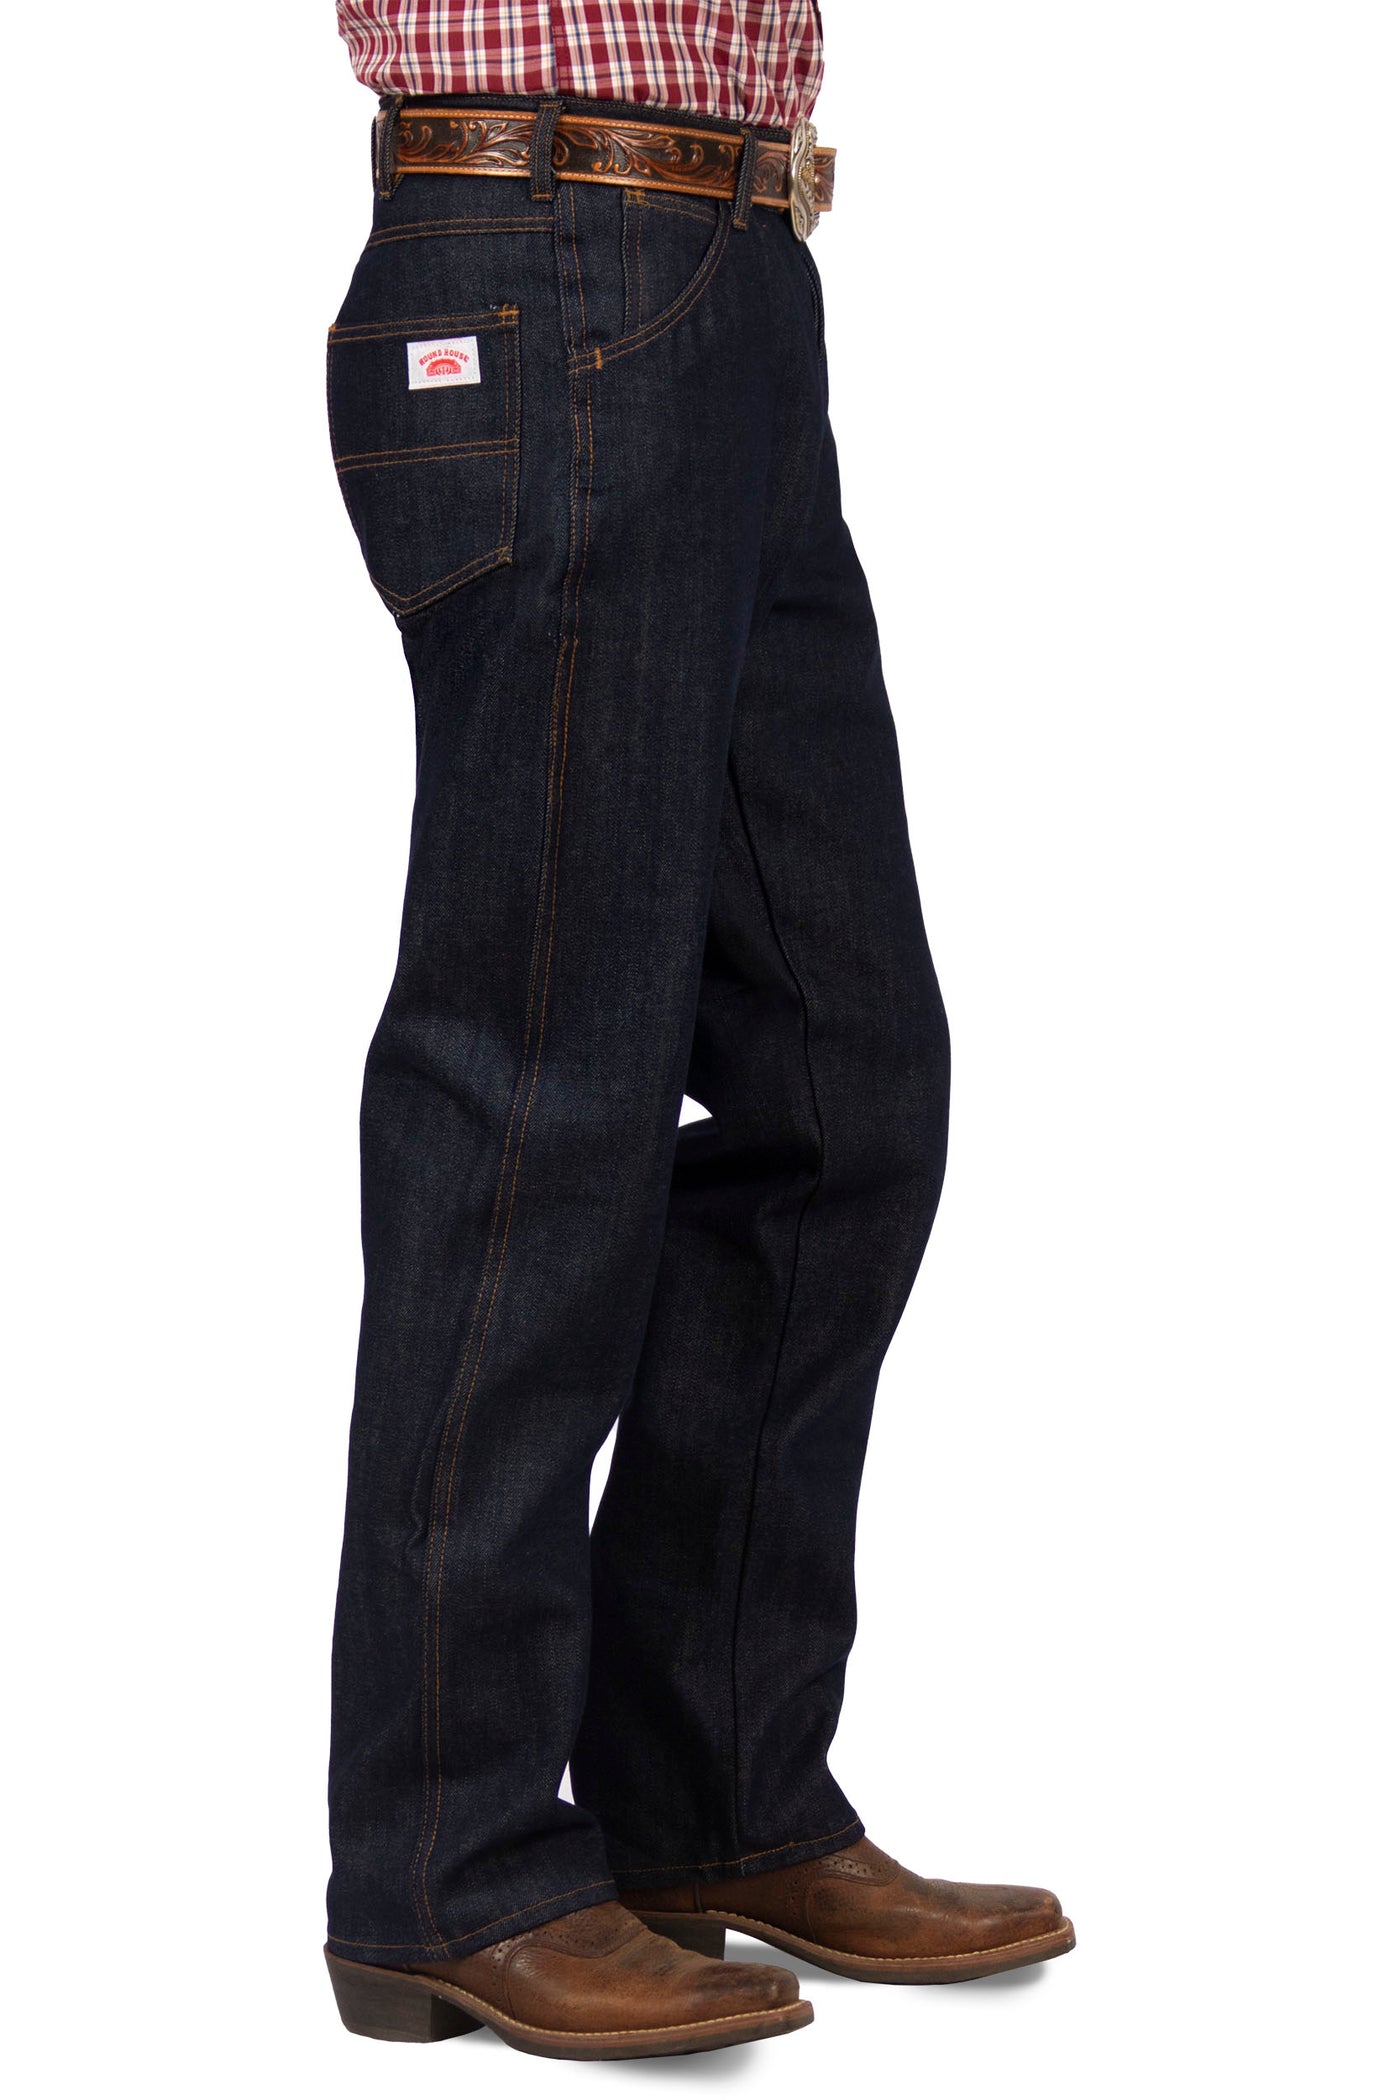 1903 Cowboy ORIGINAL FIT 5-Pocket Jean - MADE IN USA – Round House